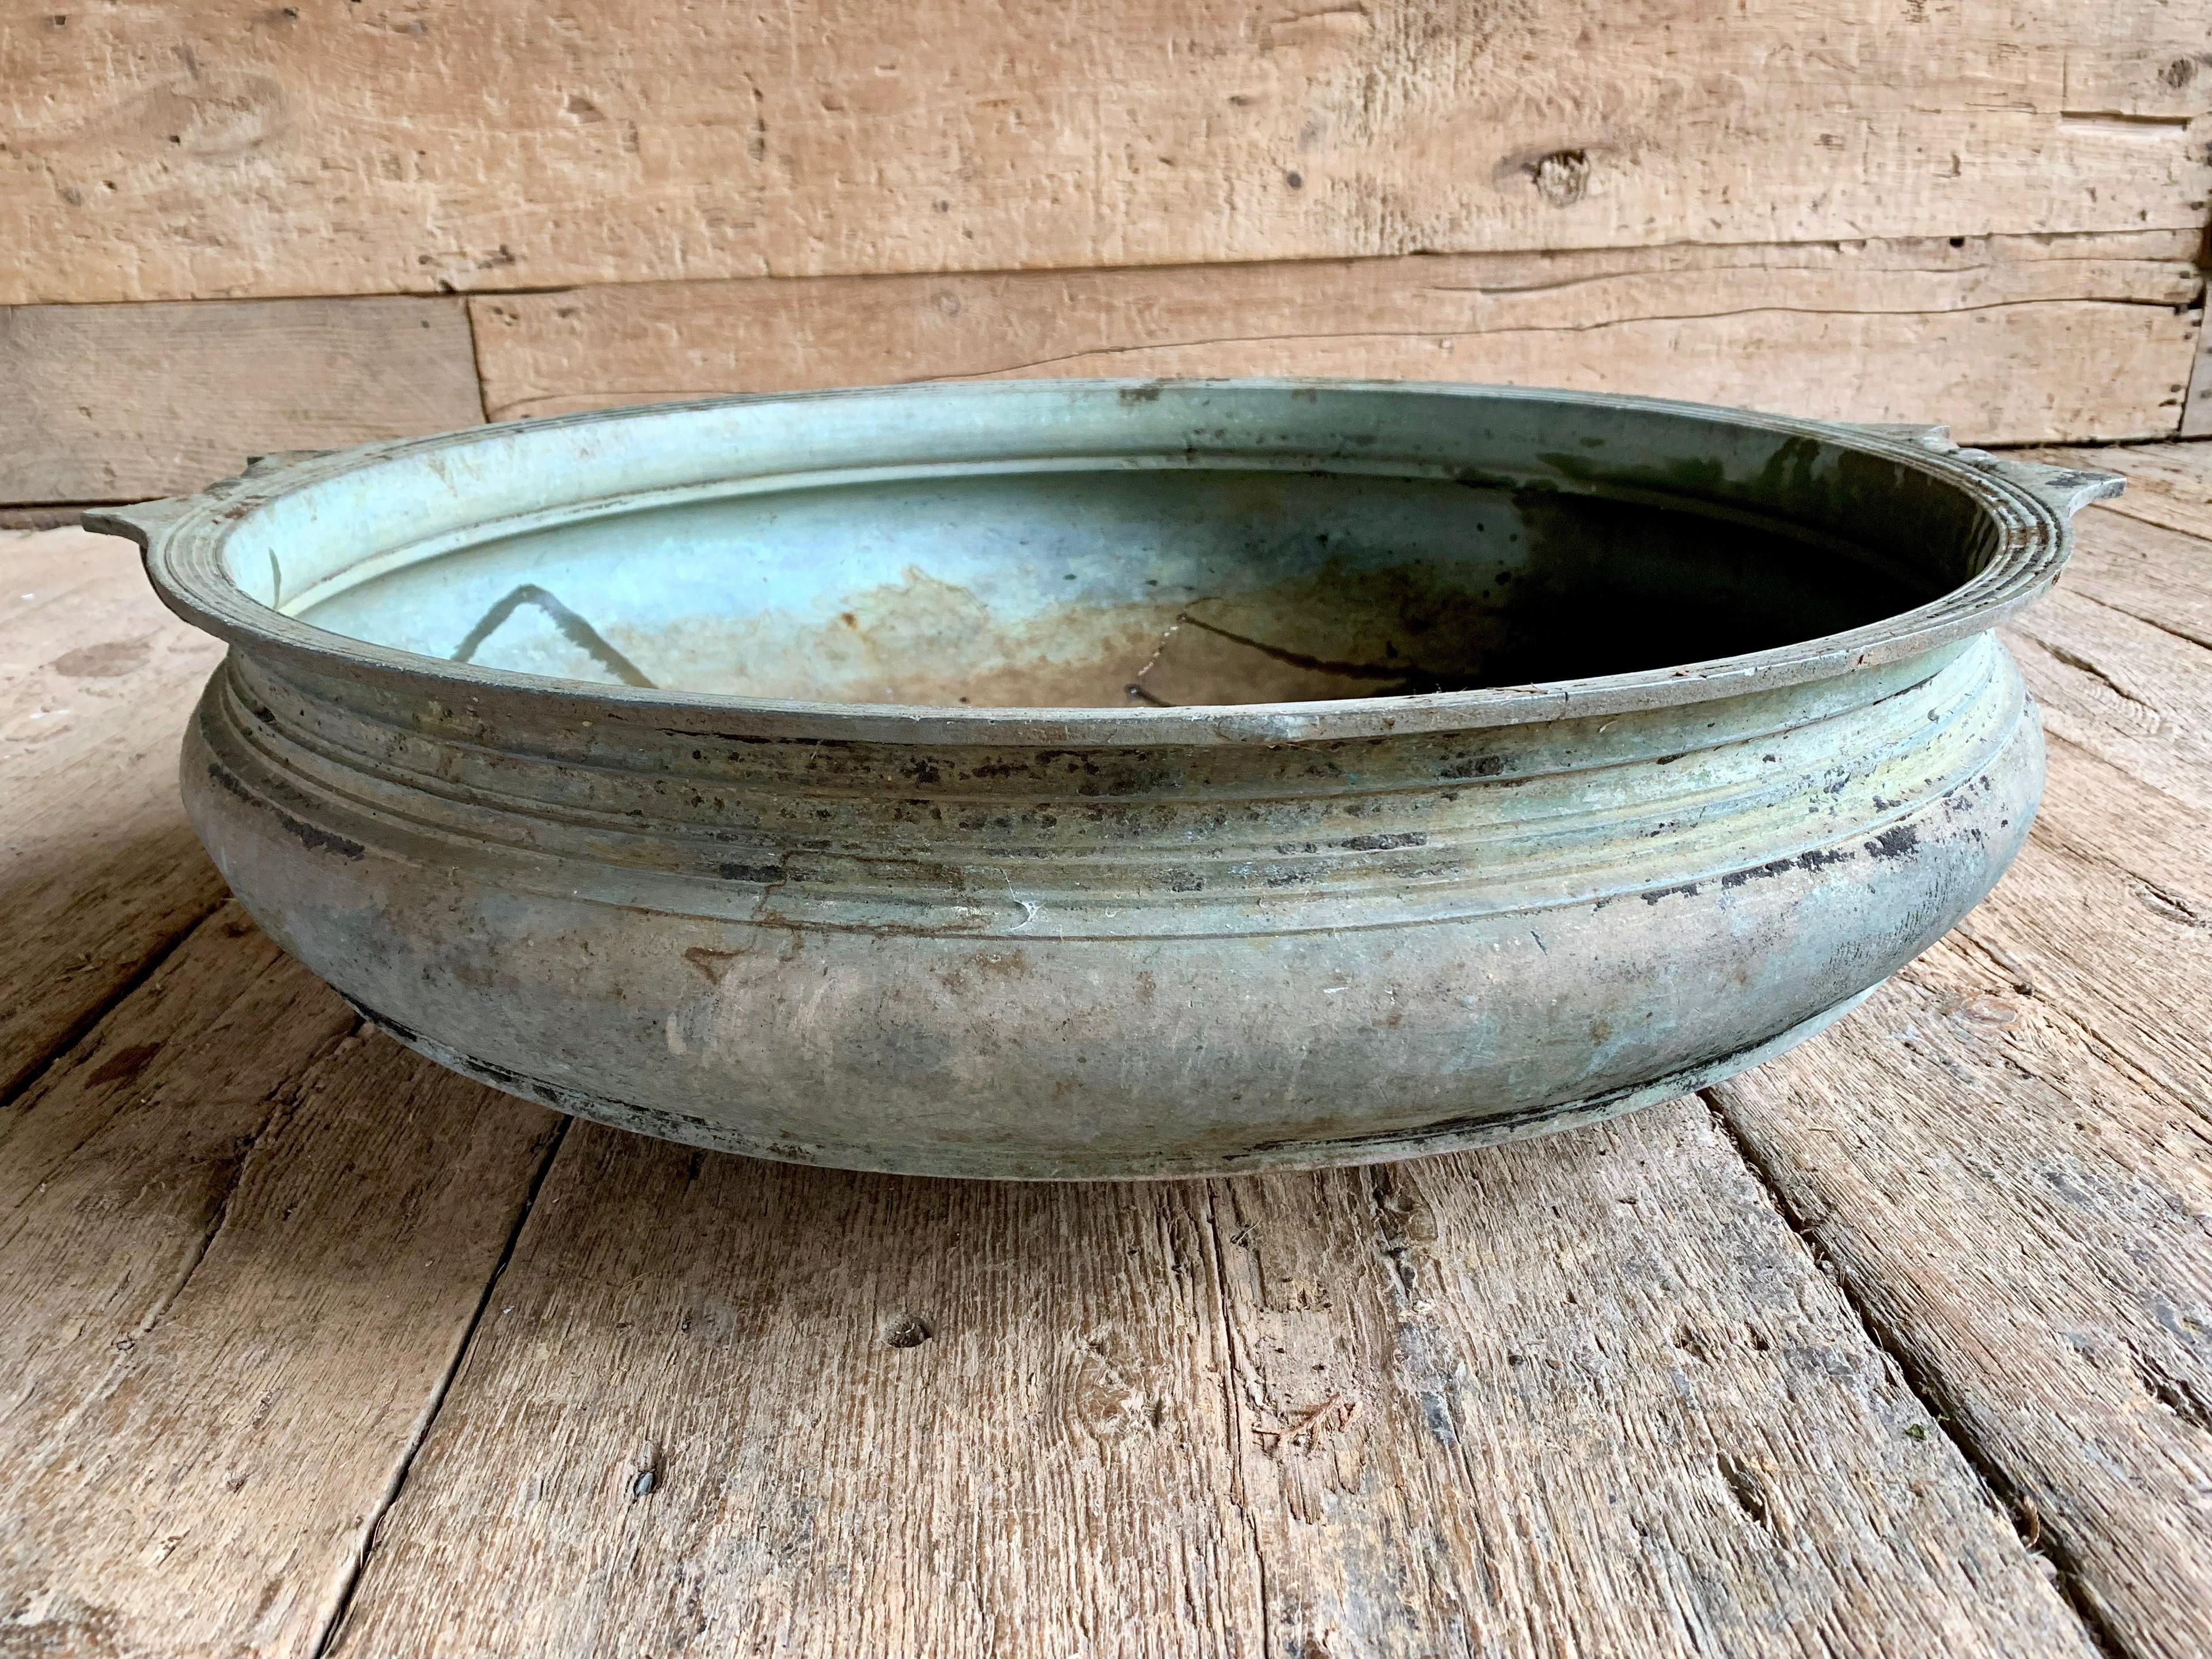 A 19th century large cast bronze bowl-form Urli with handles and a nice patina. 30